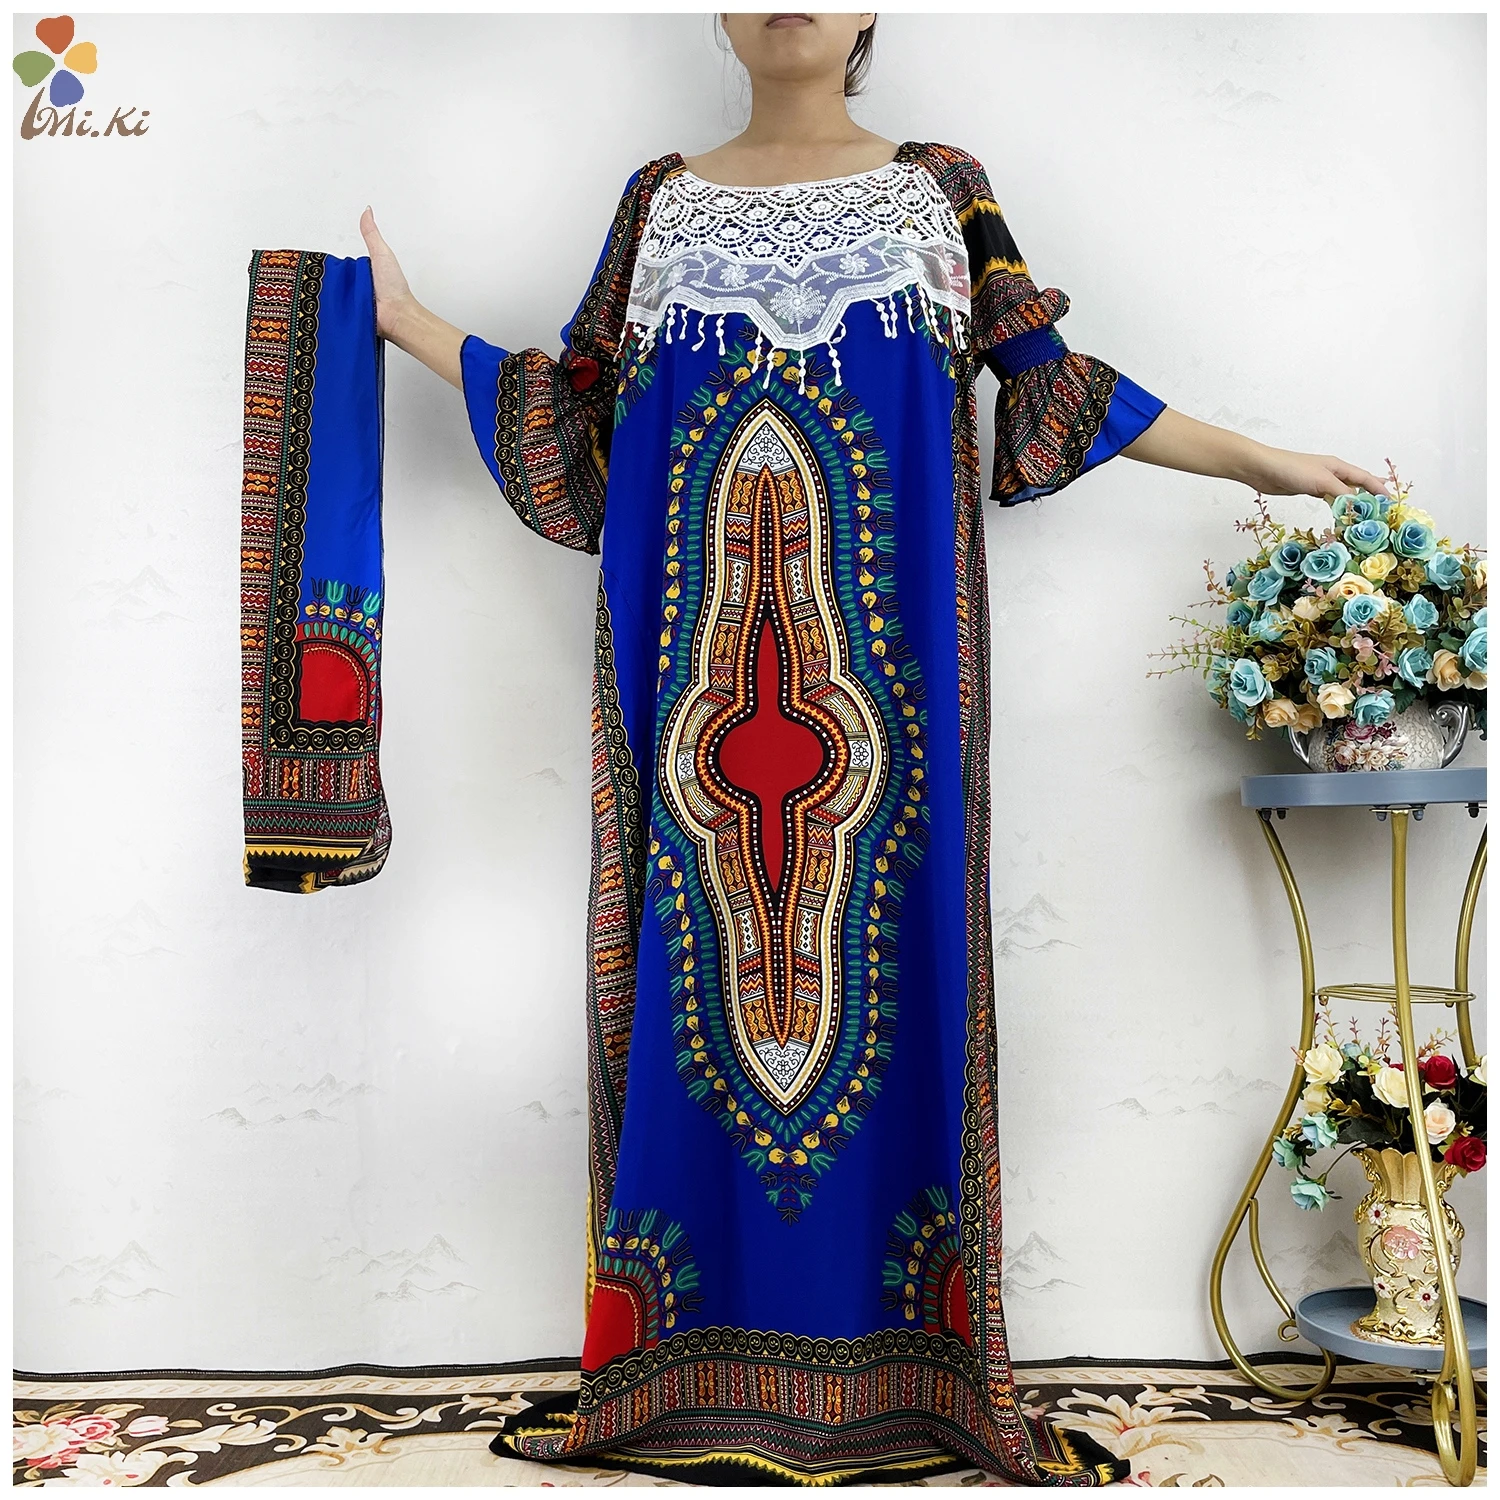 2022 New Pattern Fashion Long Sleeve 2 Pieces African Floral Printing Cotton Classic Africa Design Elegant Lady Casual Dresses